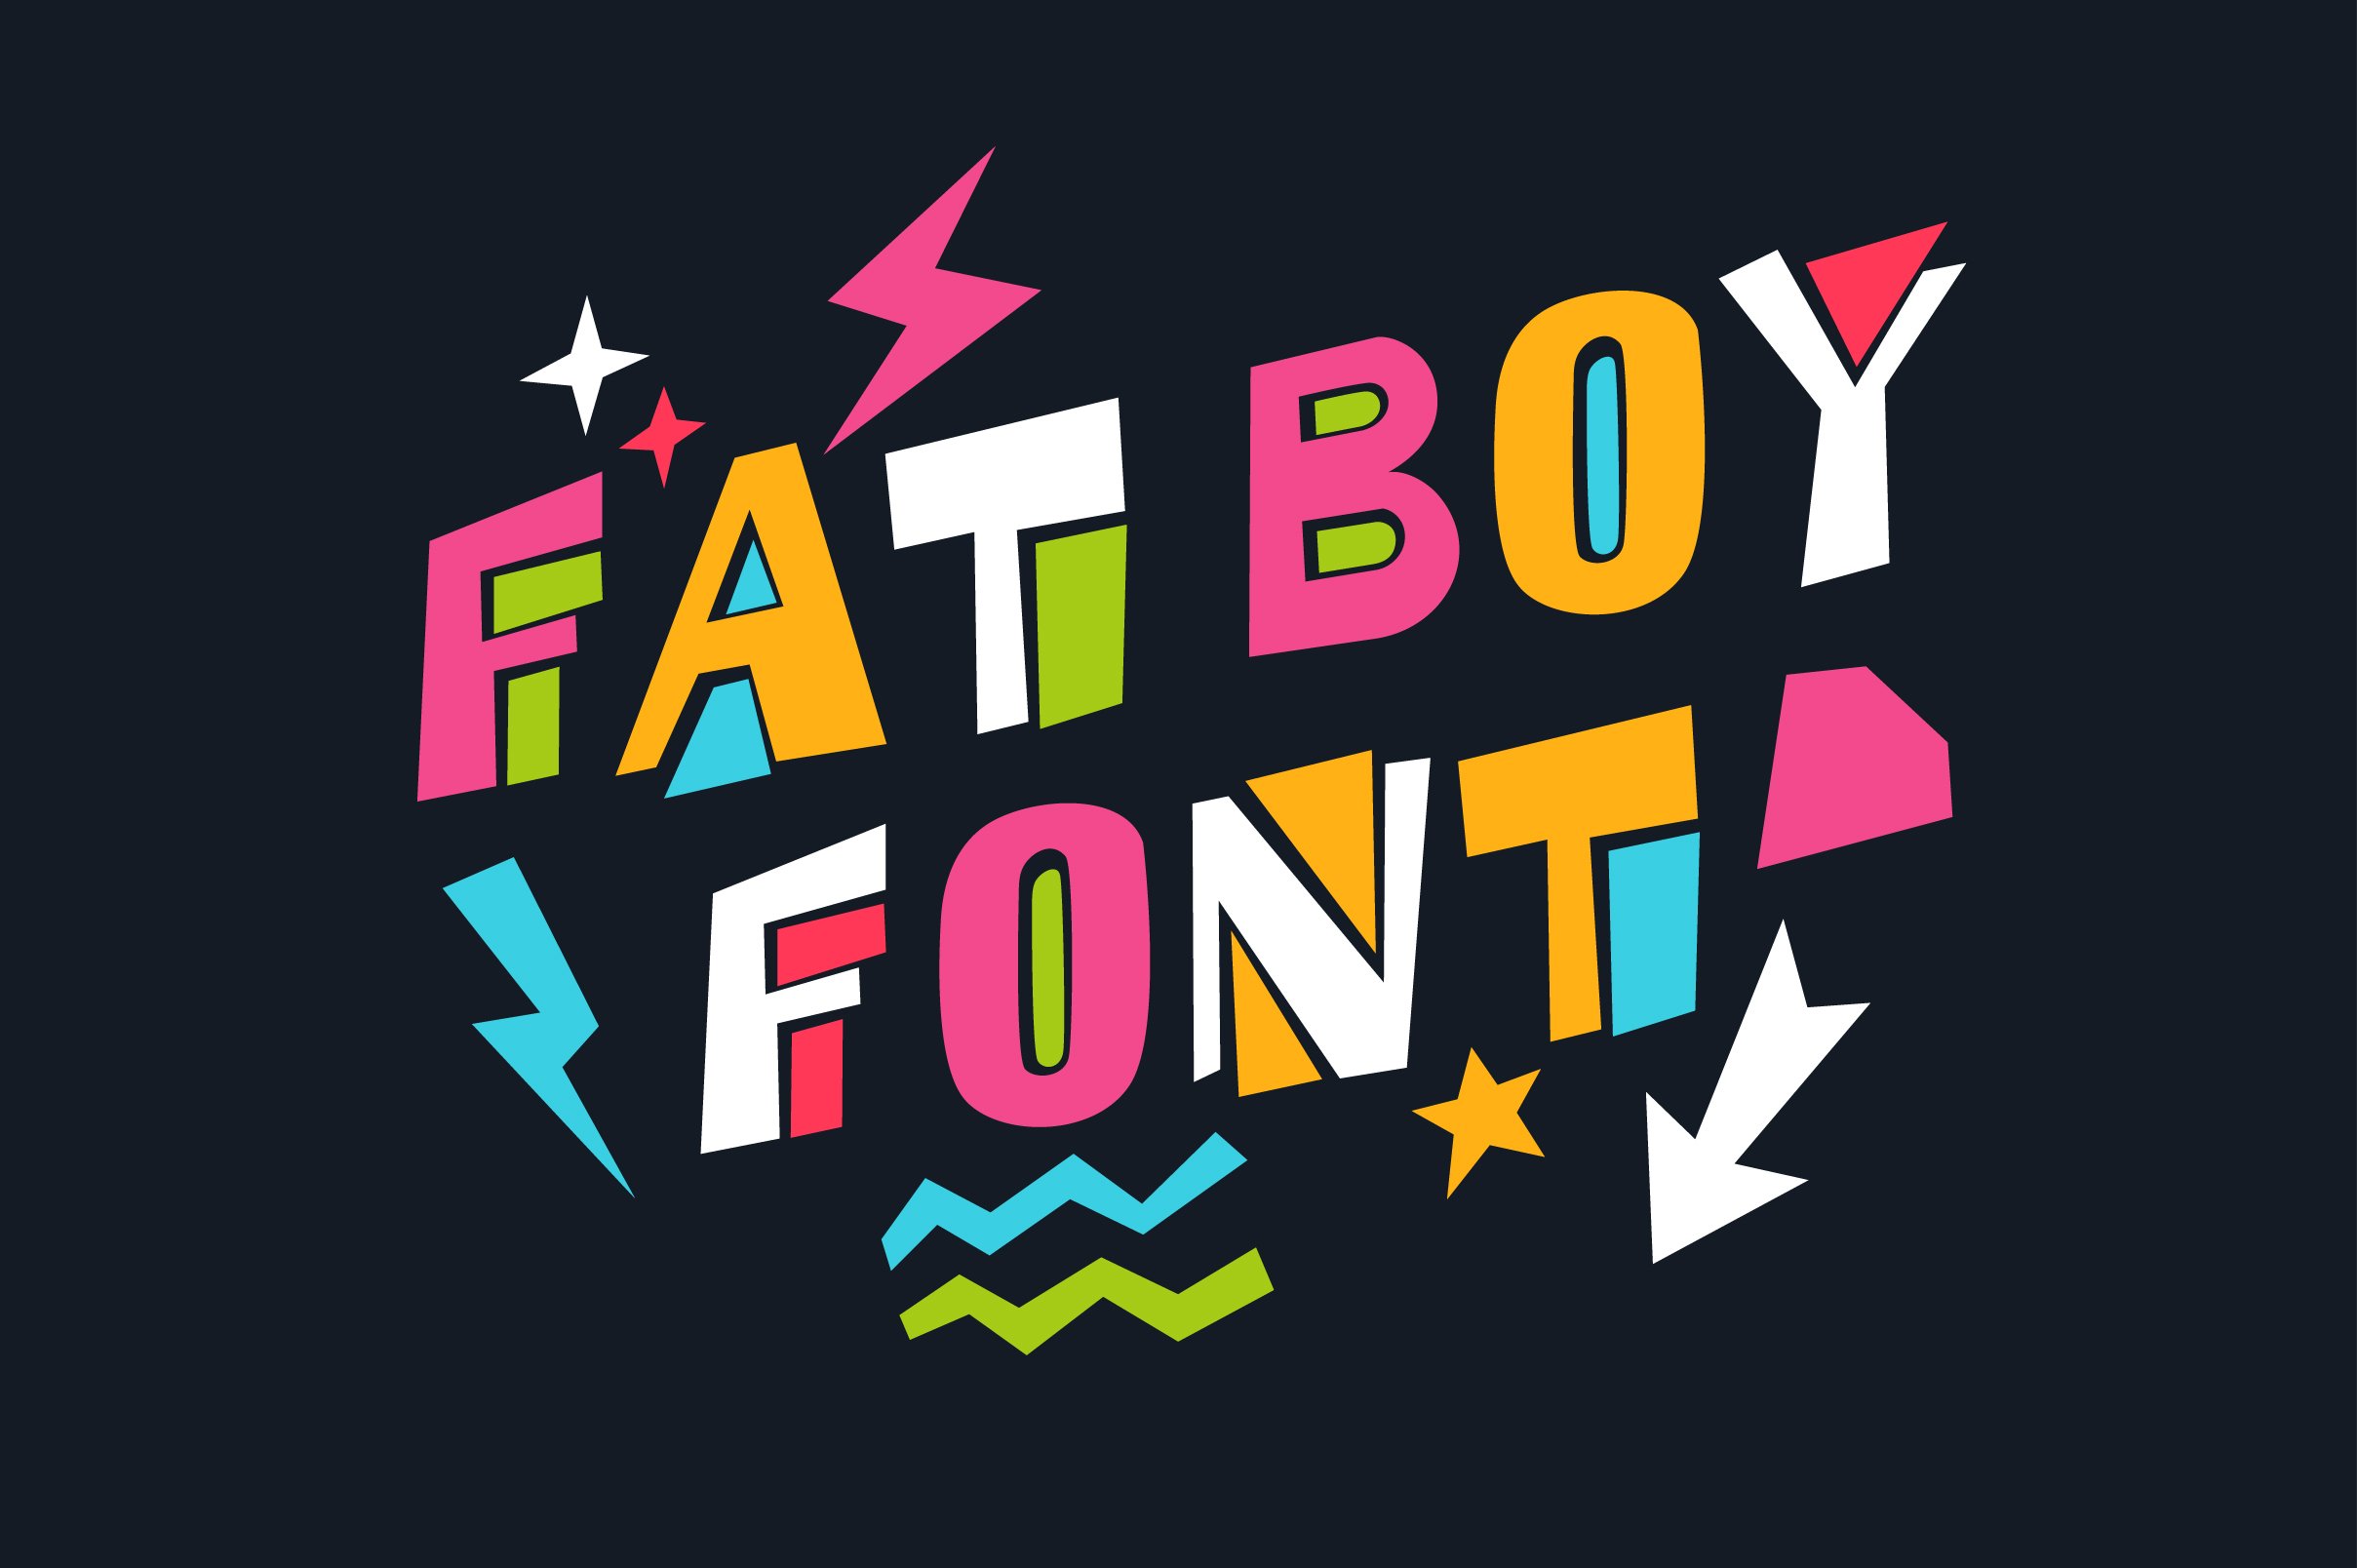 FAT BOY cover image.